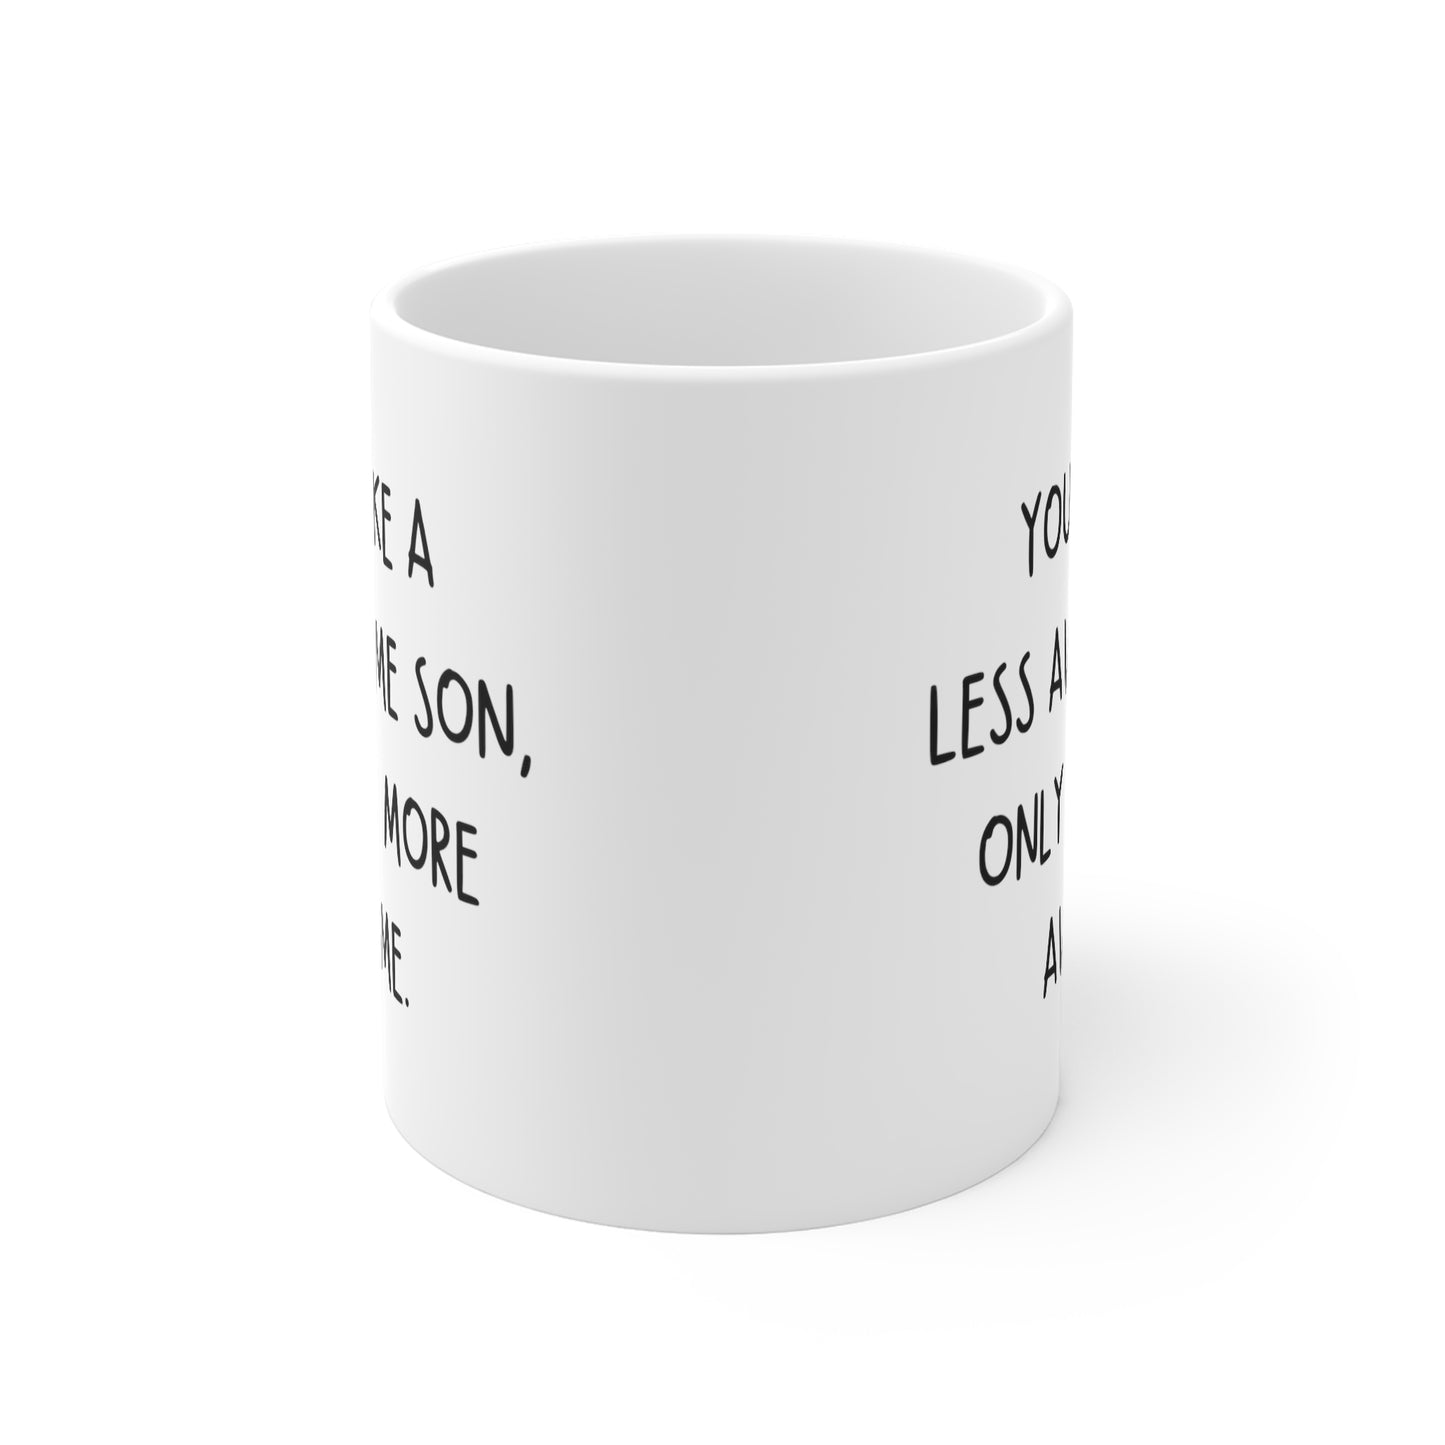 You're Like A Less Awesome Son, Only Way More Awesome | Funny, Snarky Gift | White Ceramic Mug, Handwritten Block Font